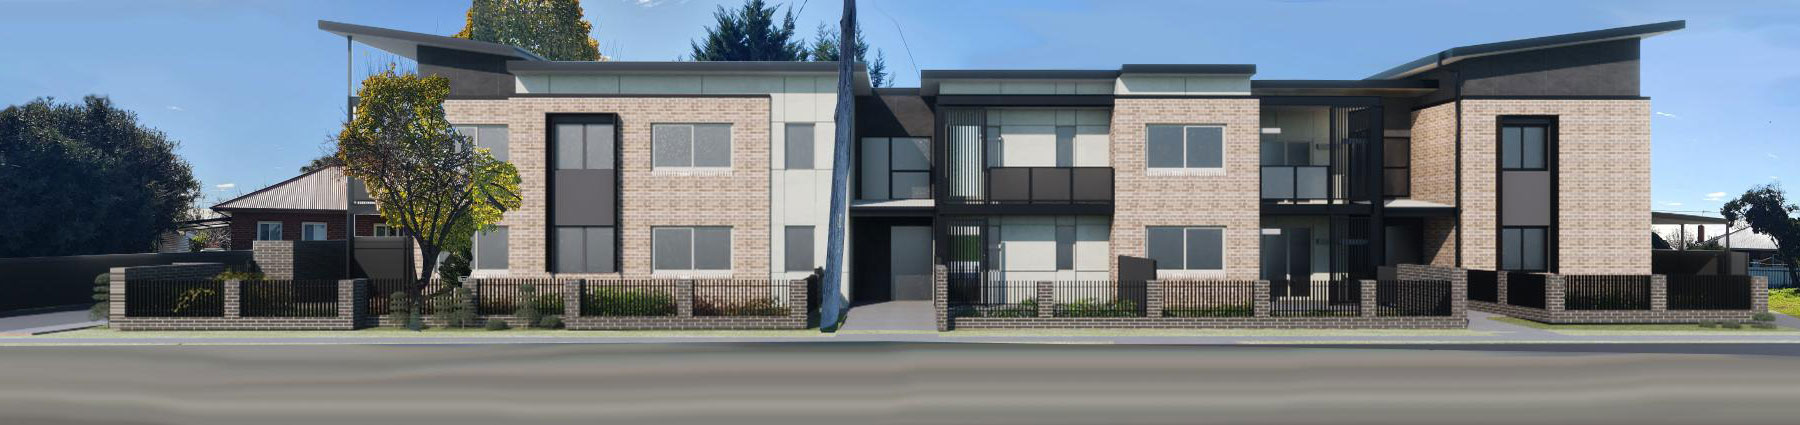 Artists impression of new housing for Wagga Wagga